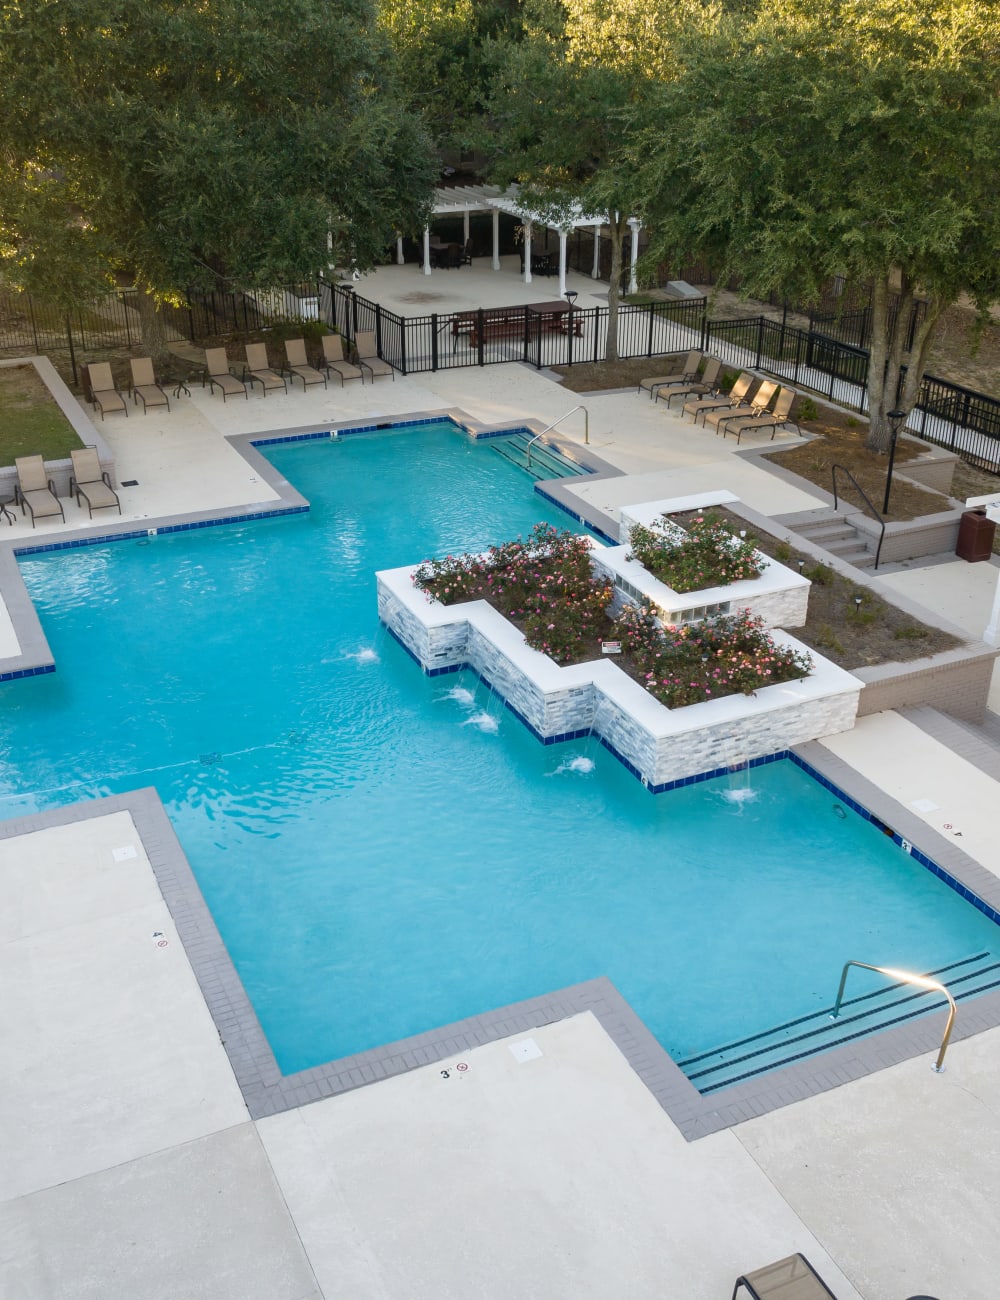 The sparkling community swimming pool at Lenox Gates in Mobile, Alabama